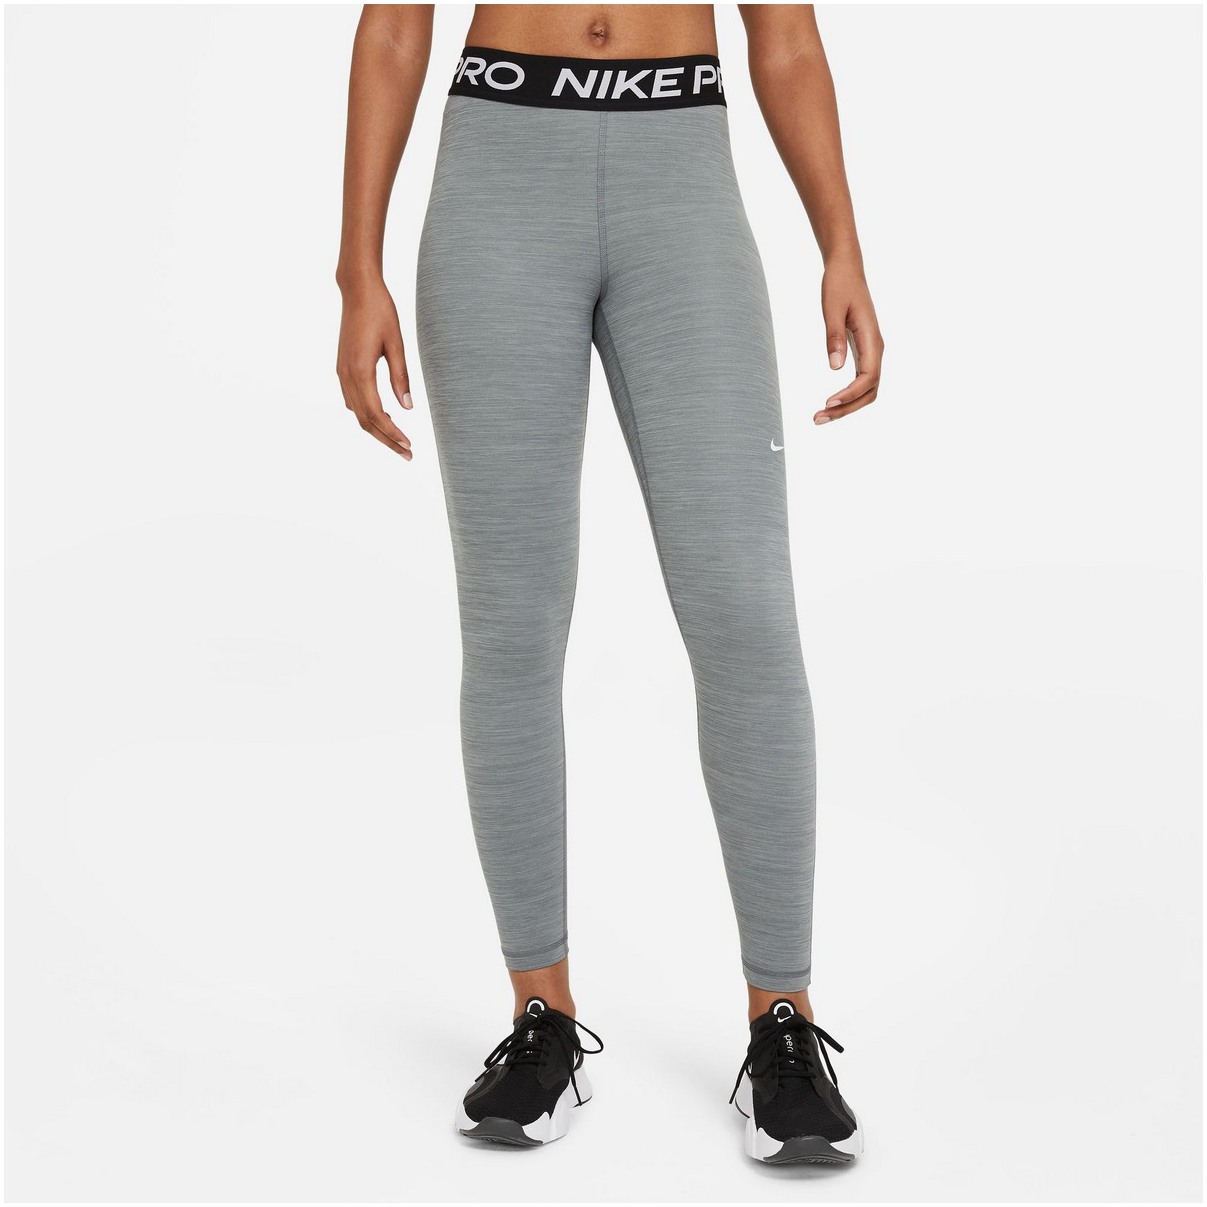 Womens high waisted compression leggings Nike PRO 365 W